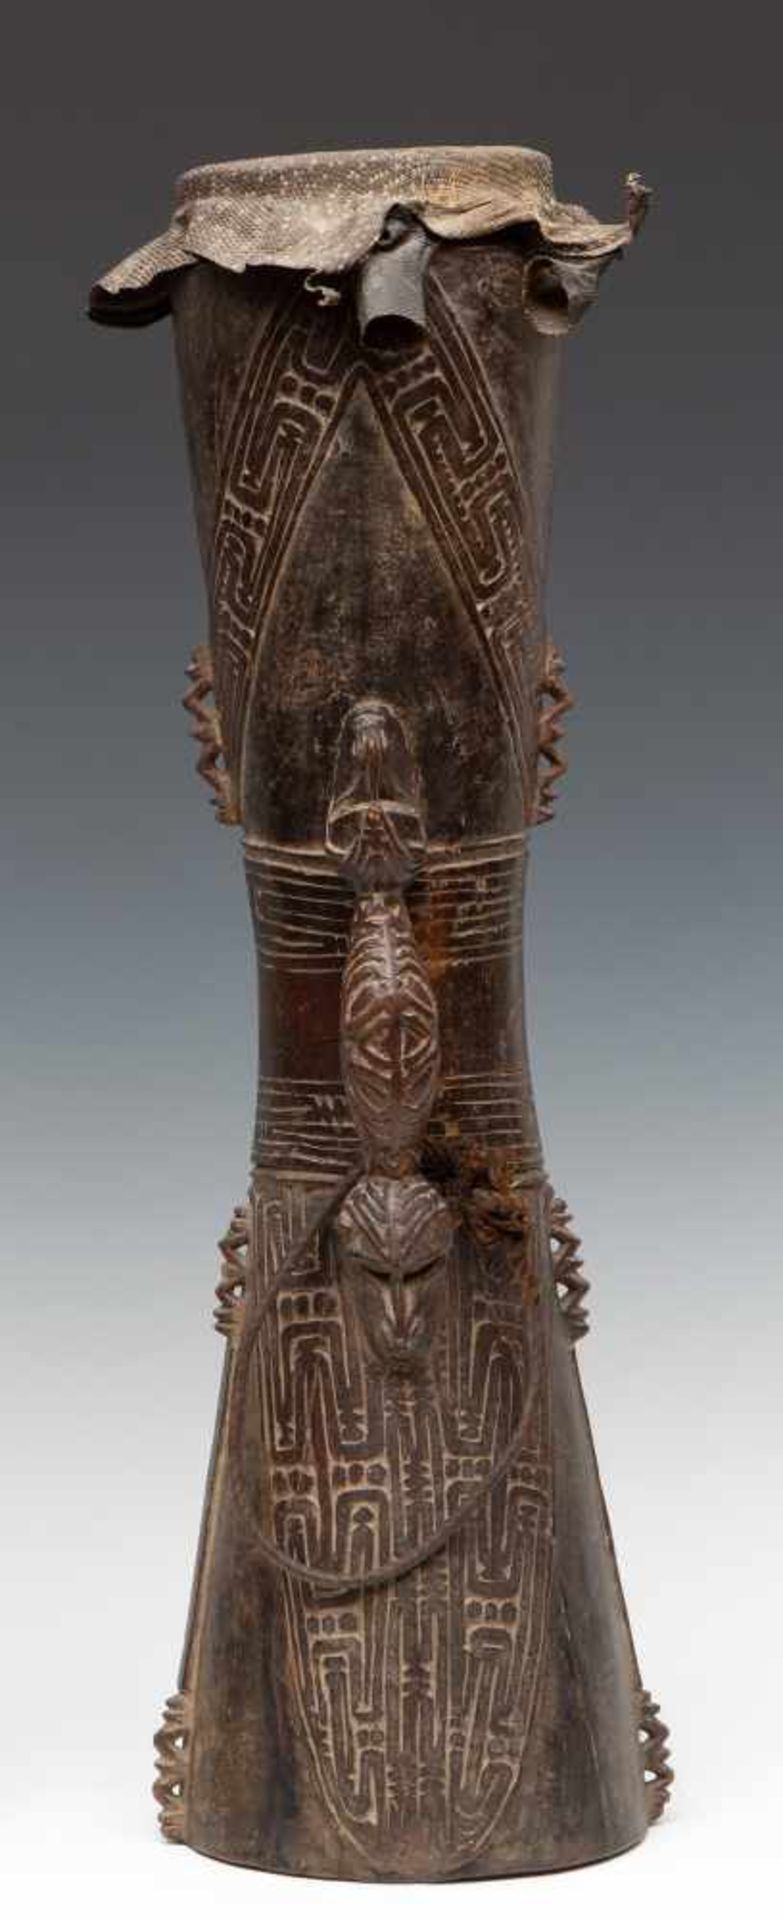 PNG, Lower Sepik, hourglass-shaped drum, the handle on both sides decoratedwith an anthropomorphic - Bild 4 aus 5